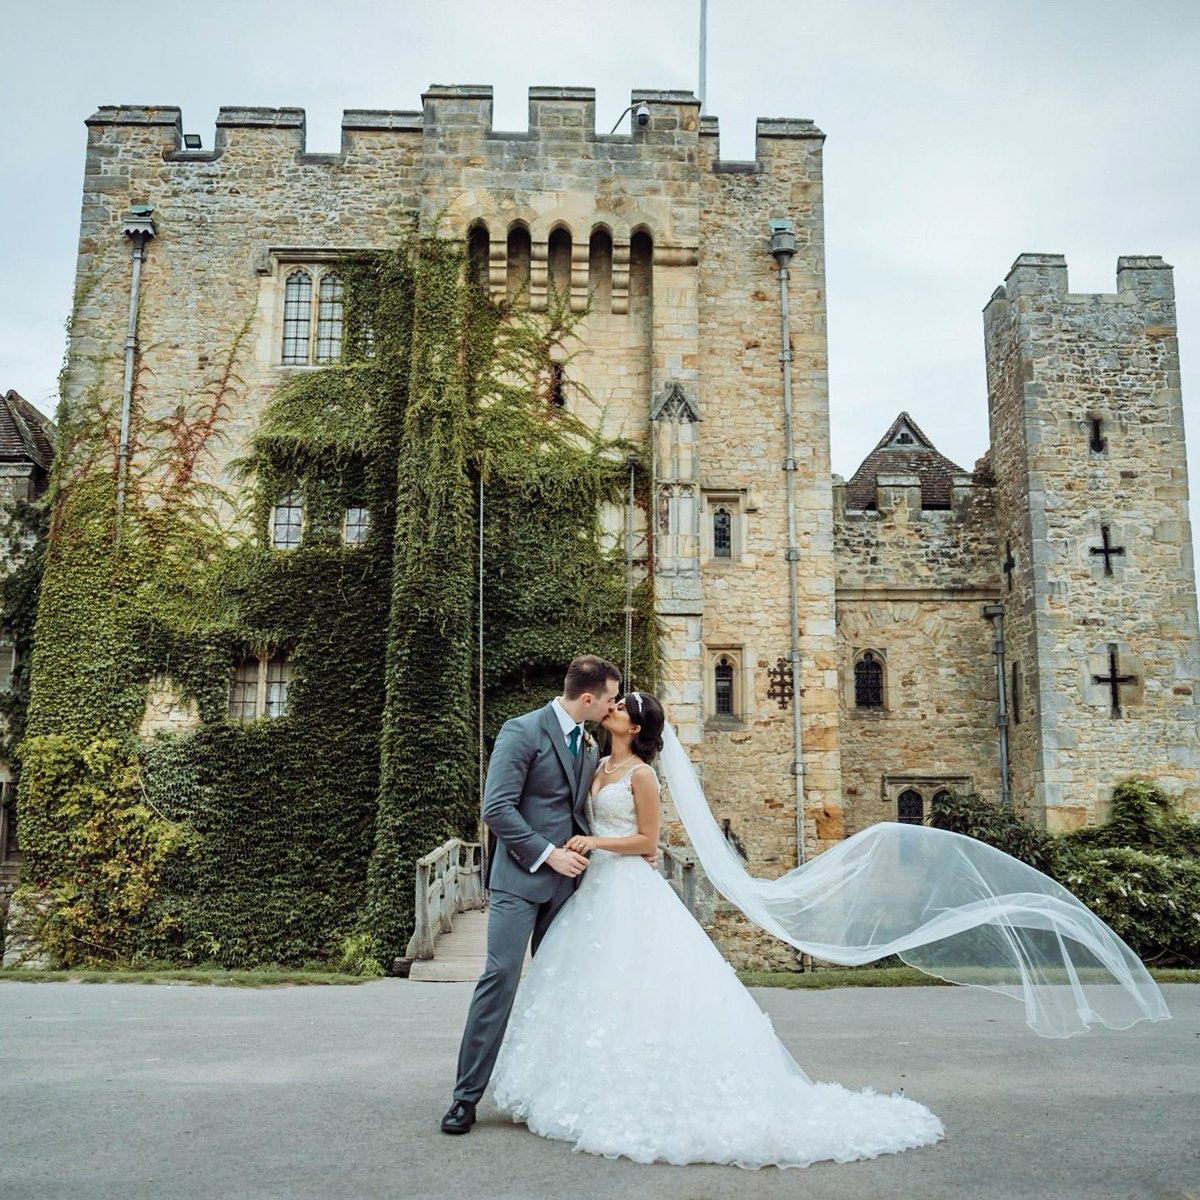 Don't miss @hevercastle's wedding showcase on 4 February 2024 - just a week away! This stately castle is one of the most beautiful wedding venues in the country. Pre-booking is essential! ➡️ bit.ly/47INQBn #SquareMealxHeverCastle